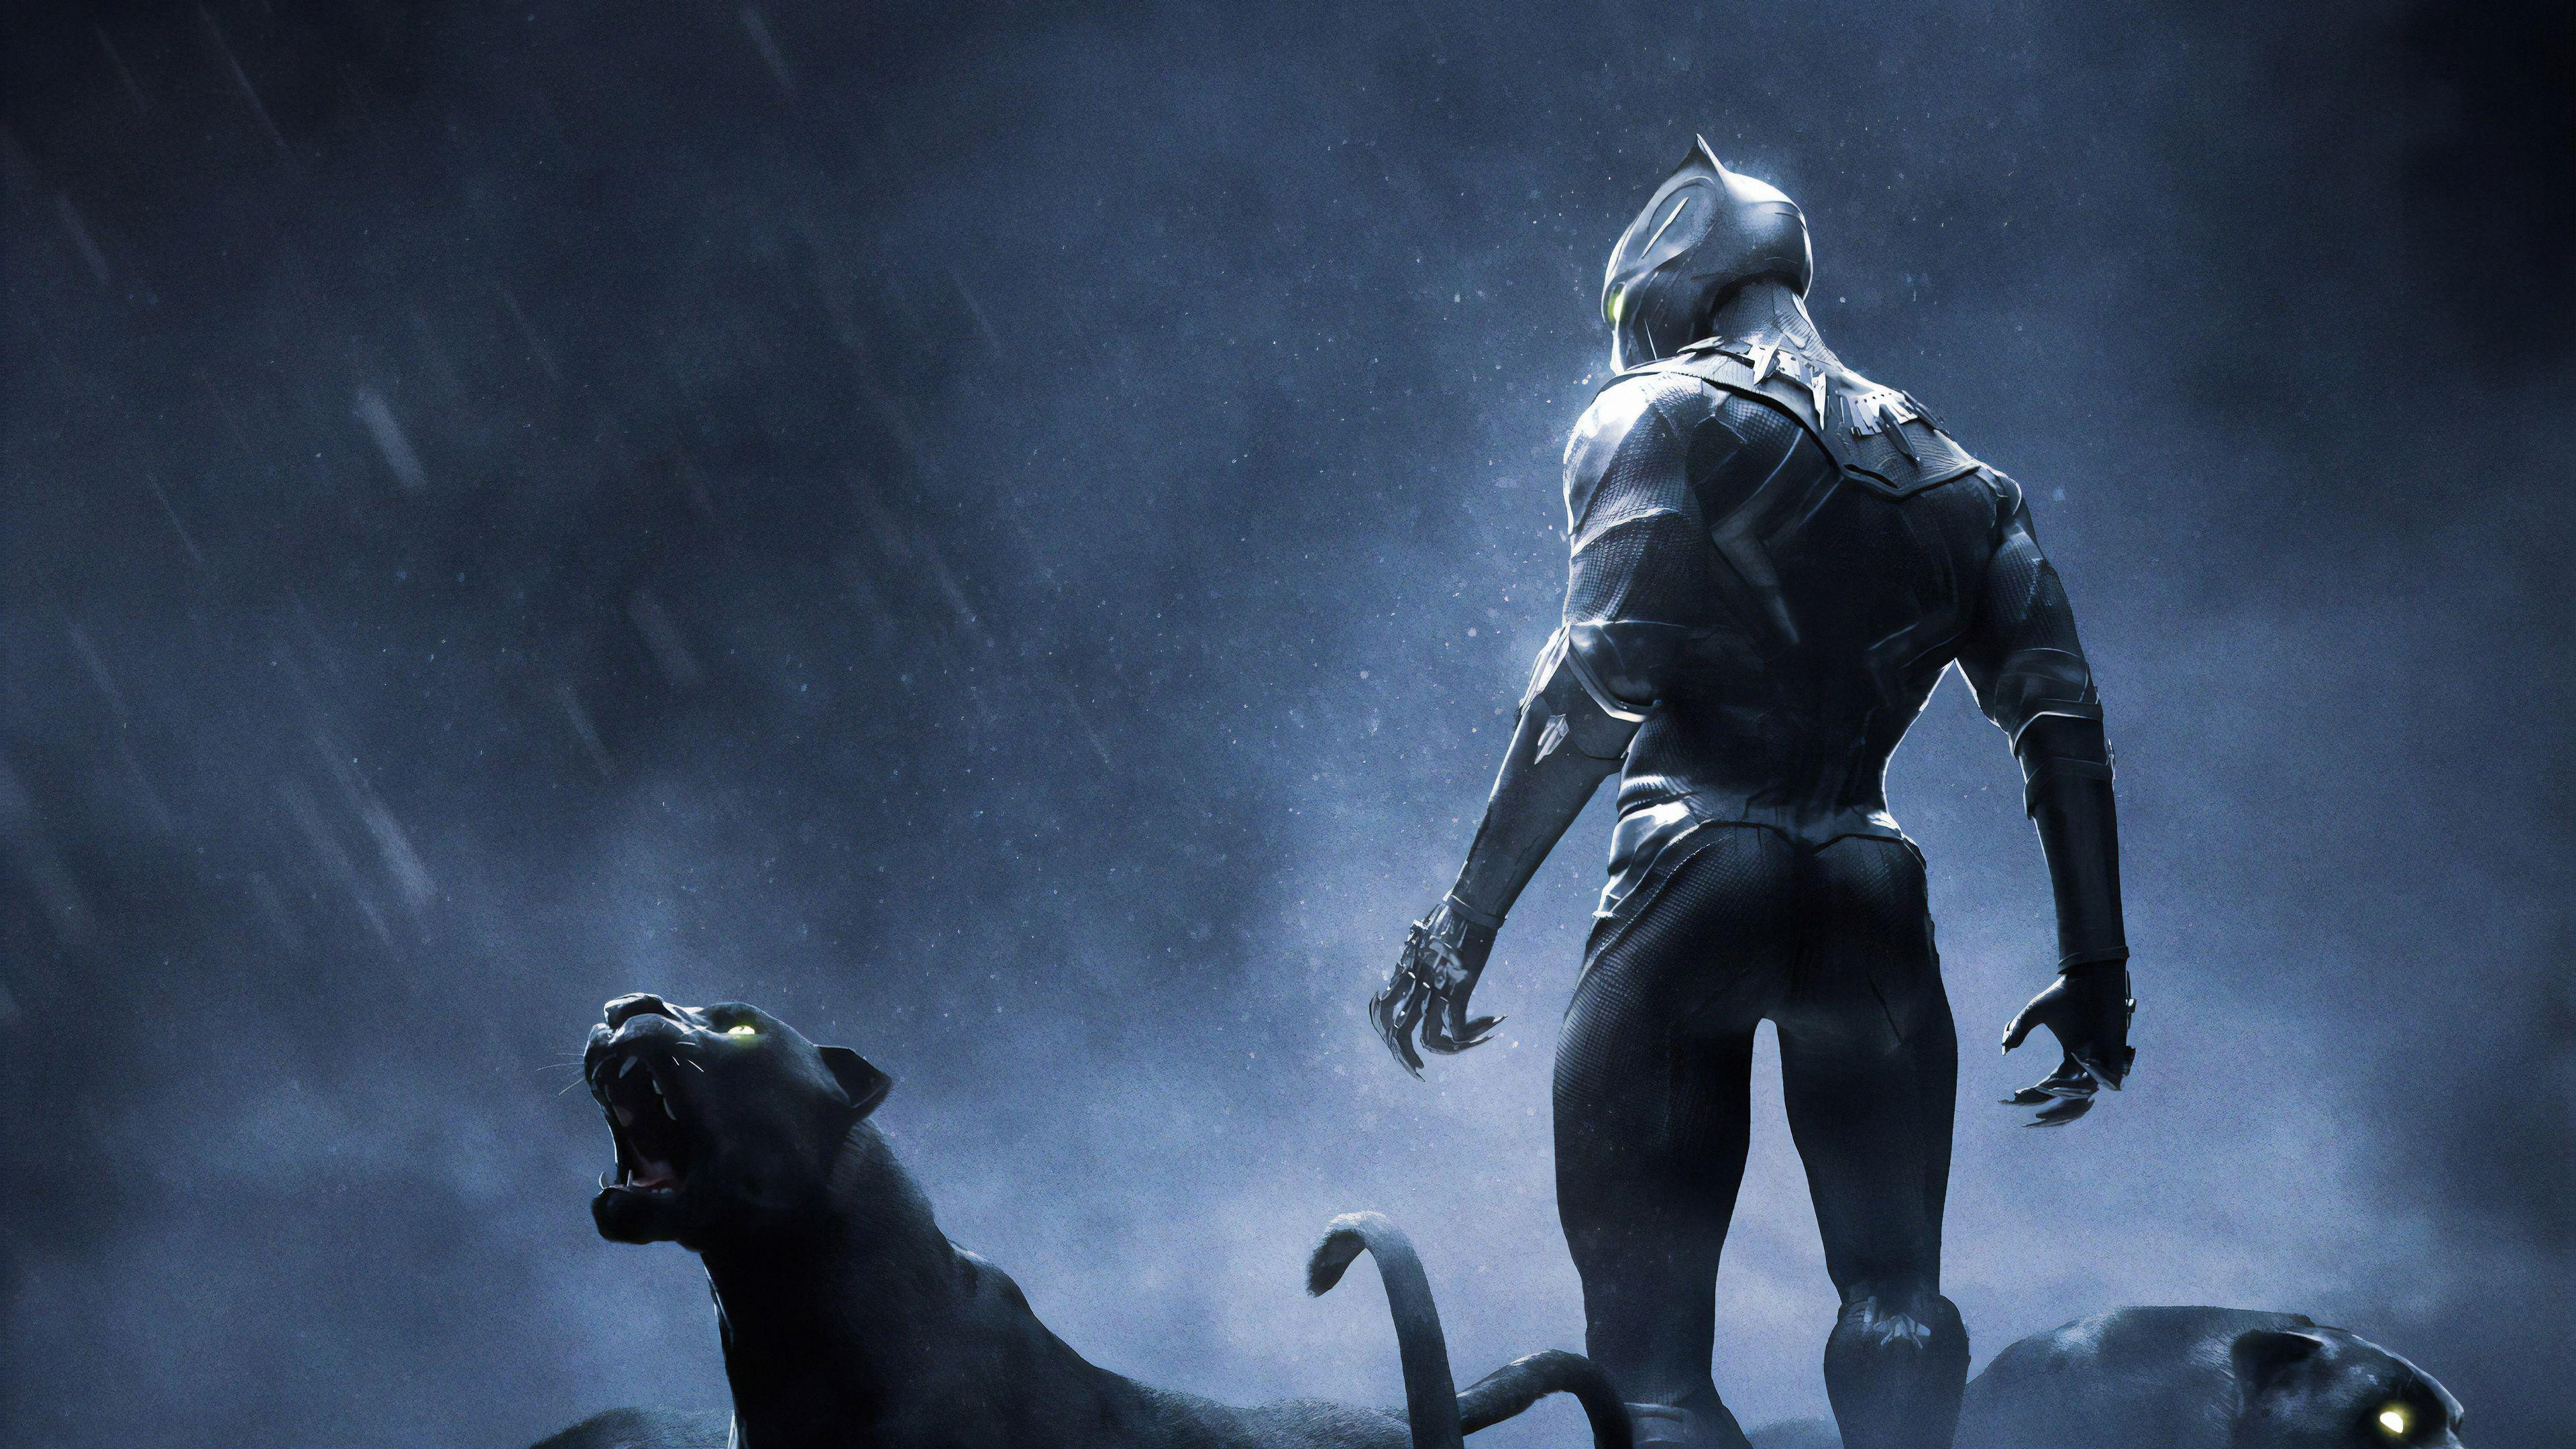 Black Panther 8k Wallpapers - Top Free Black Panther 8k Backgrounds